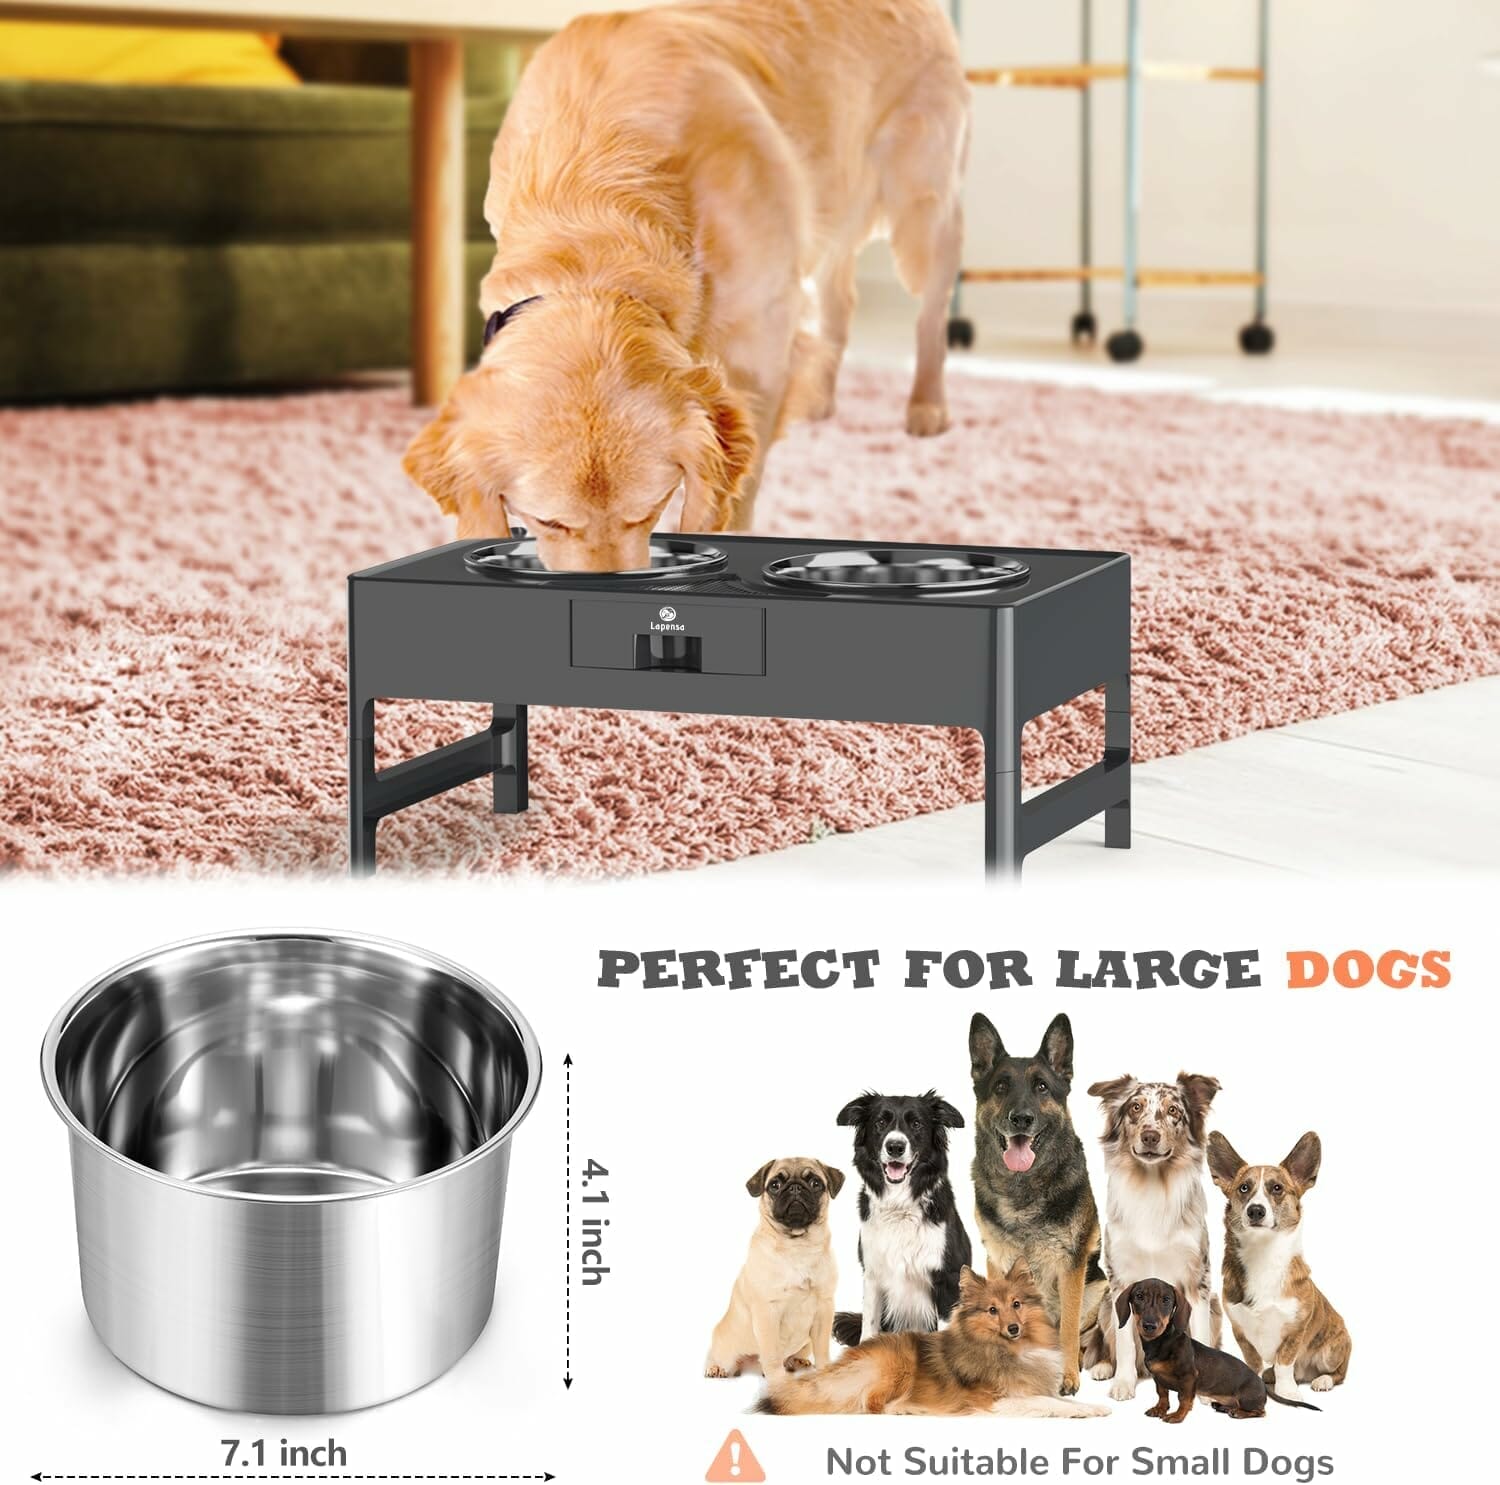 Lapensa Elevated Dog Bowls Review